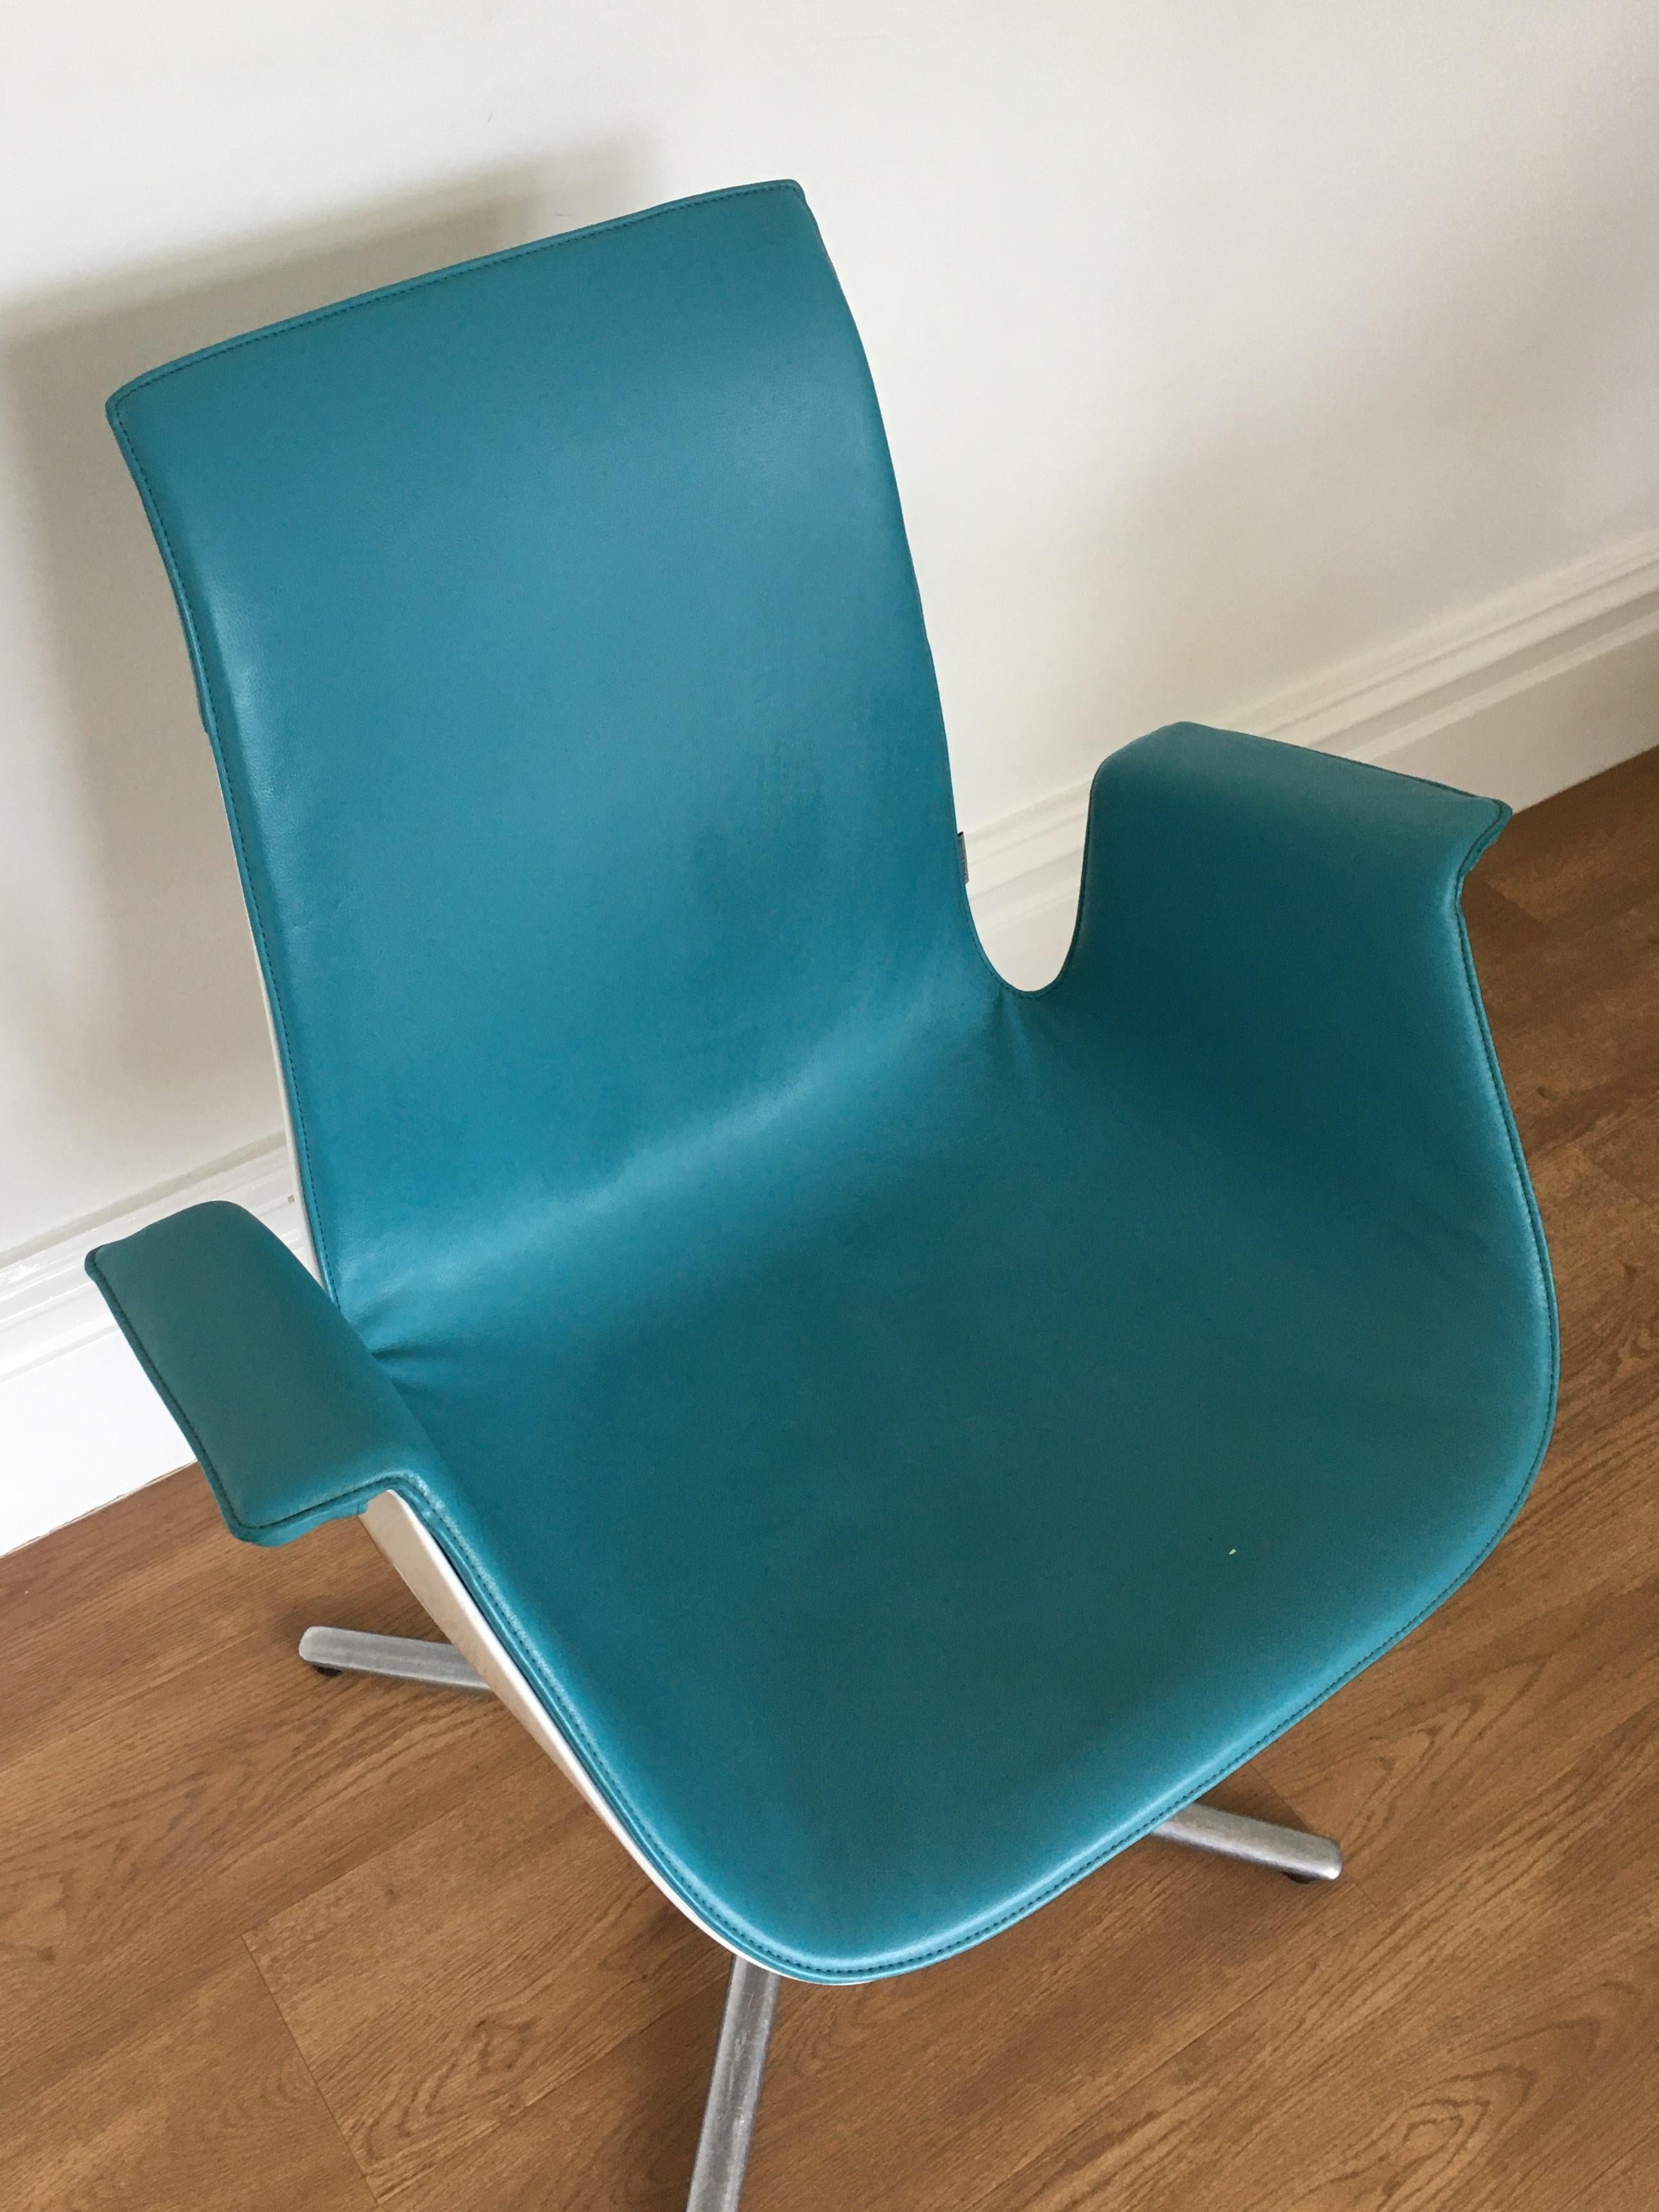 Fabricius & Kastholm FK Bucket Chair for Walter Knoll In Good Condition For Sale In Solihull, GB